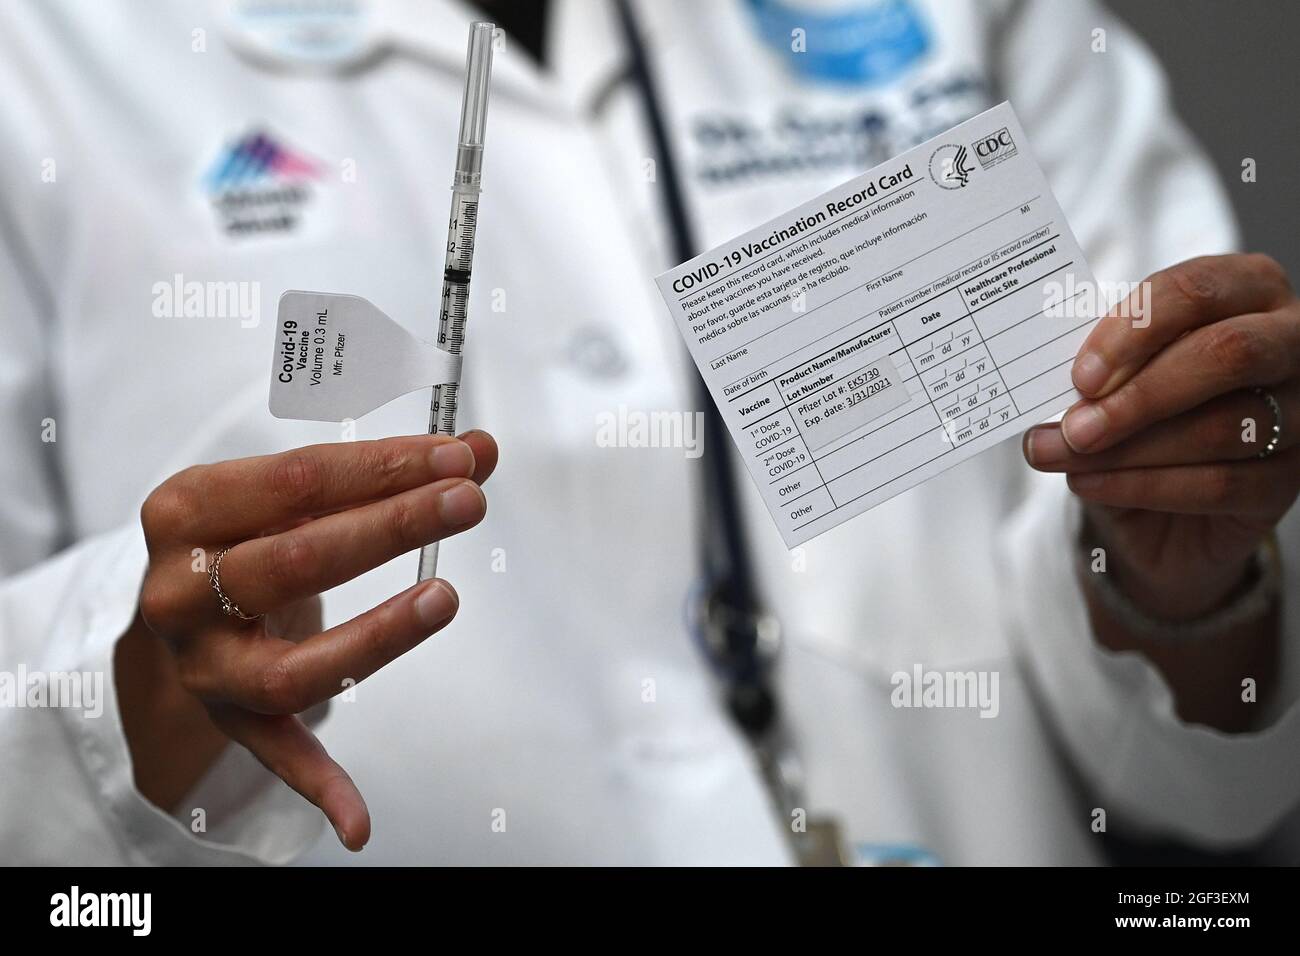 A medical professional holds a syringe containing the Pfizer COVID-19 vaccine and a proof of vaccine card before it is administered to a medical professional at Mount Sinai Hospital in New York, NY, December 15, 2020. Mount Sinai received enough Pfizer COVID-19 vaccine doses to inoculate 975 members of their medical staff.   (Photo by Anthony Behar/Sipa USA) Stock Photo